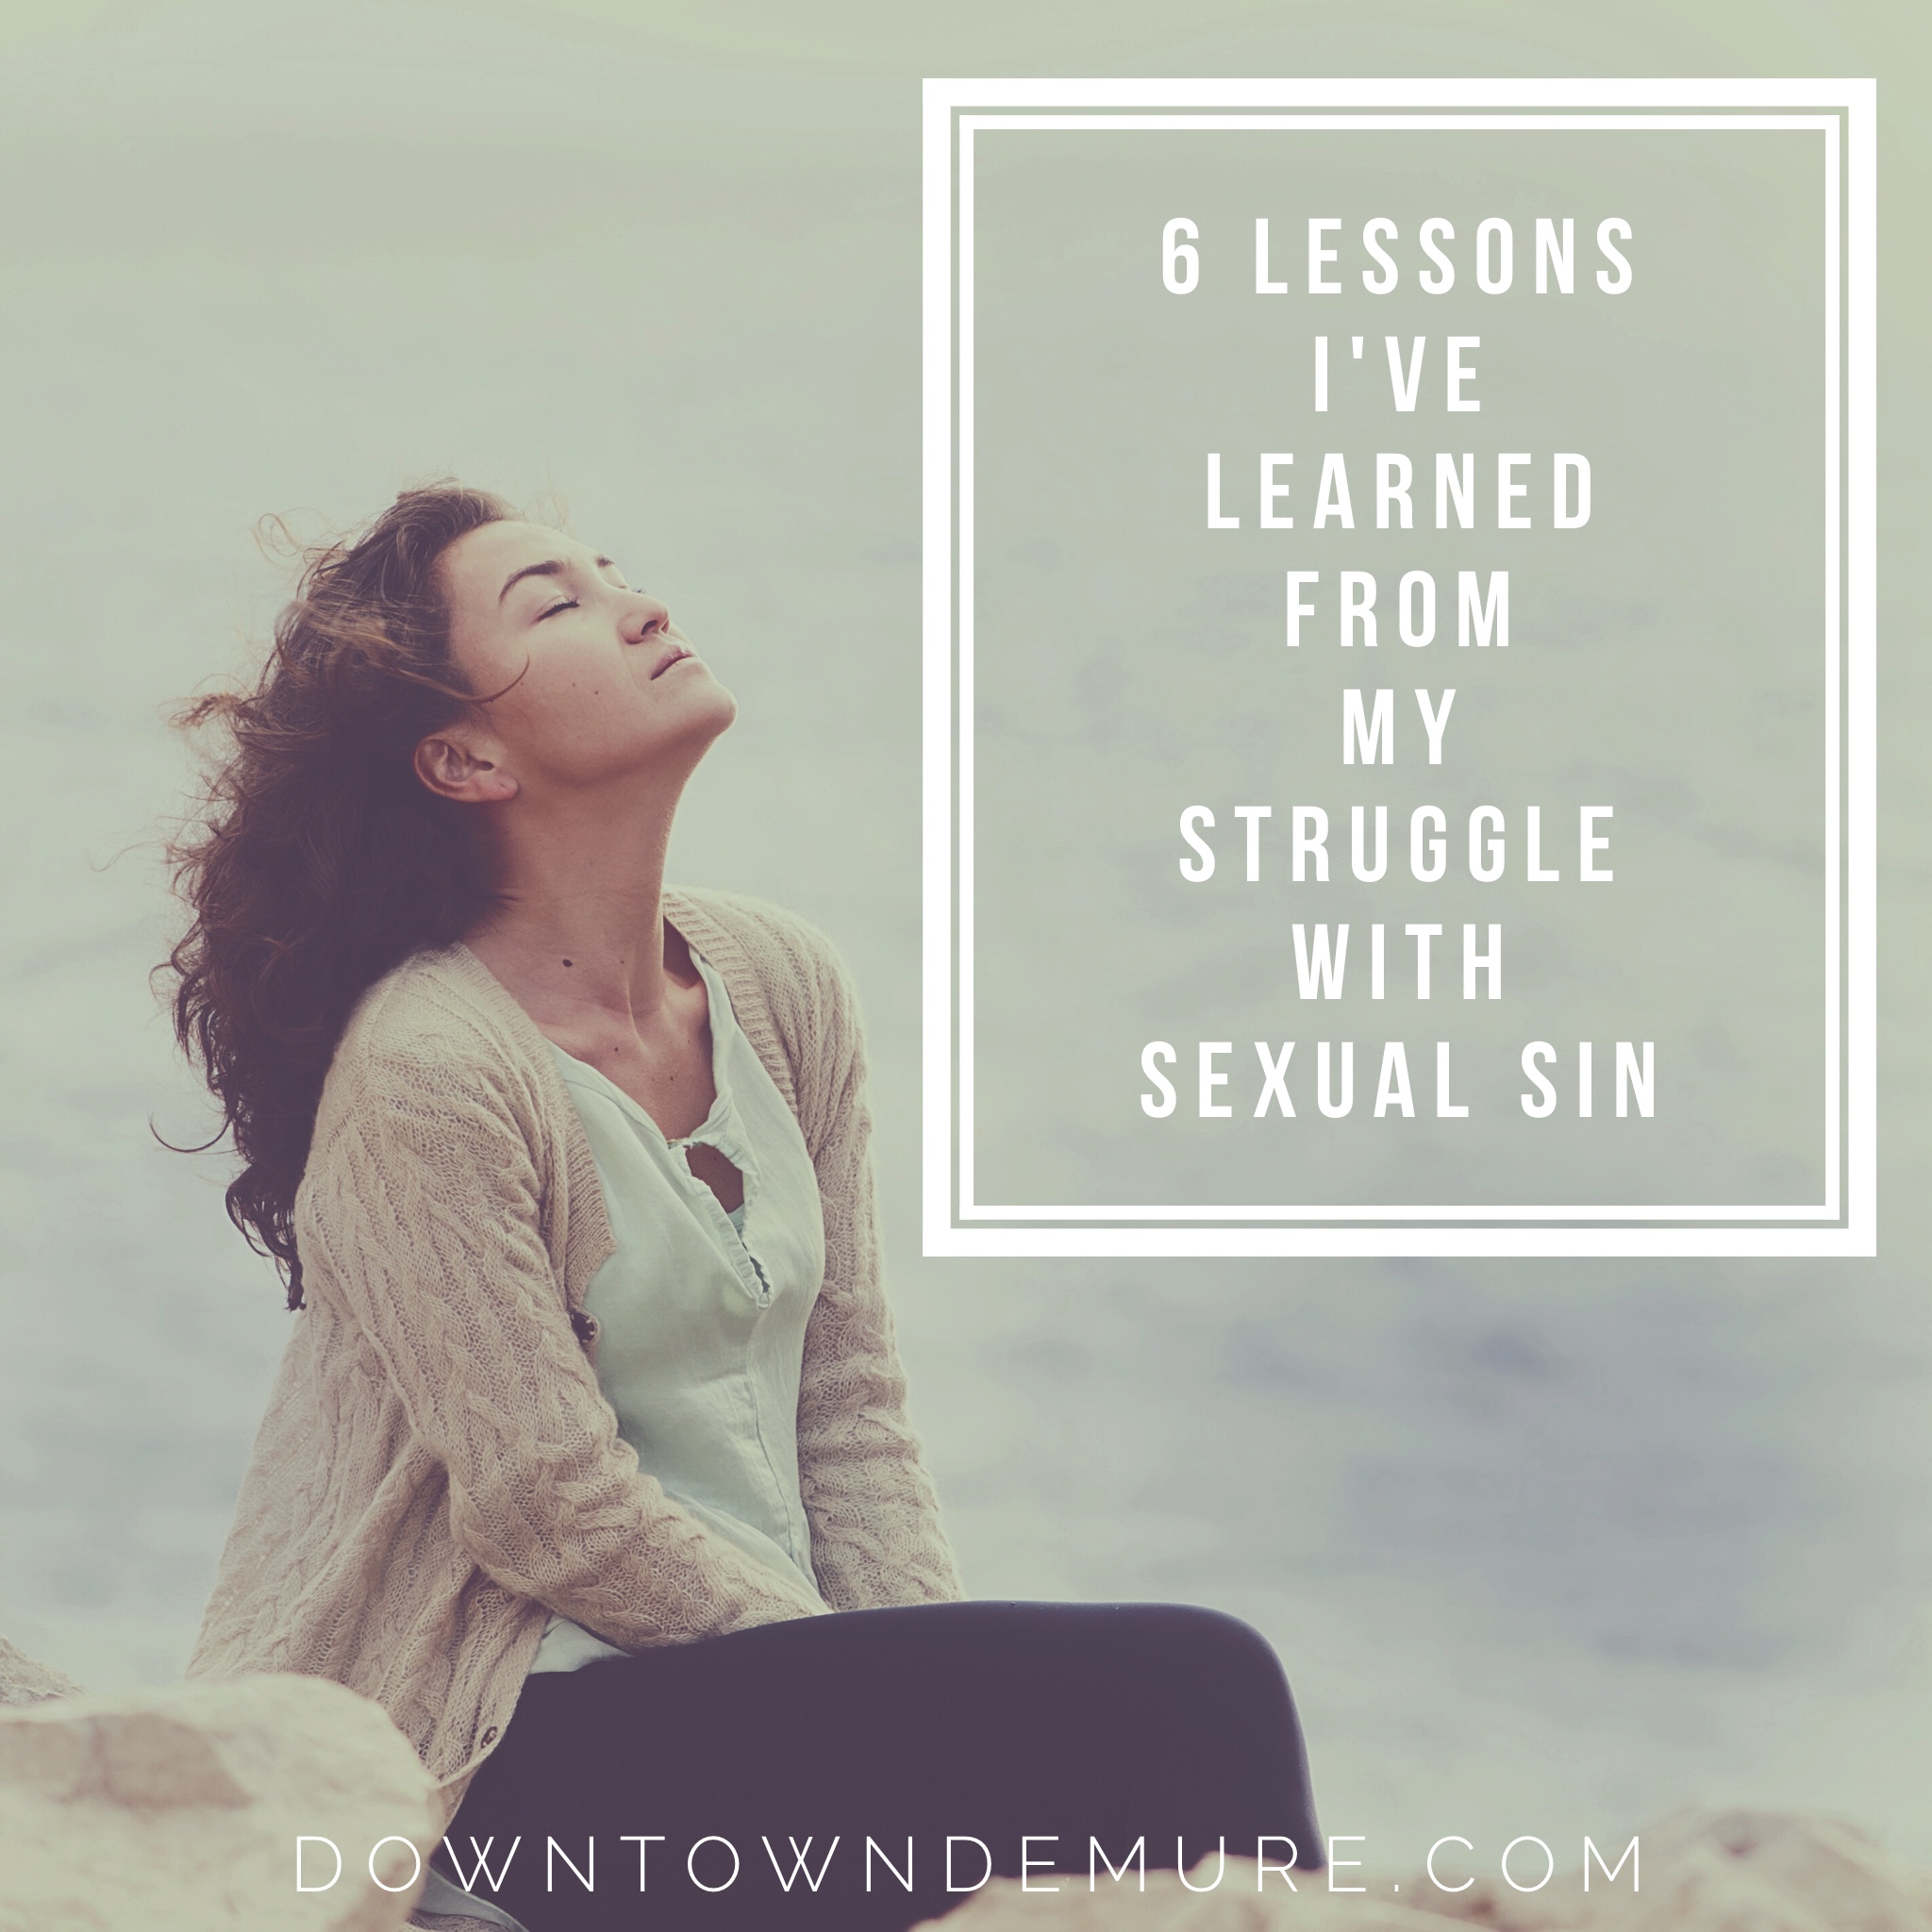 6 lessons I've learned from my struggle with sexual sin